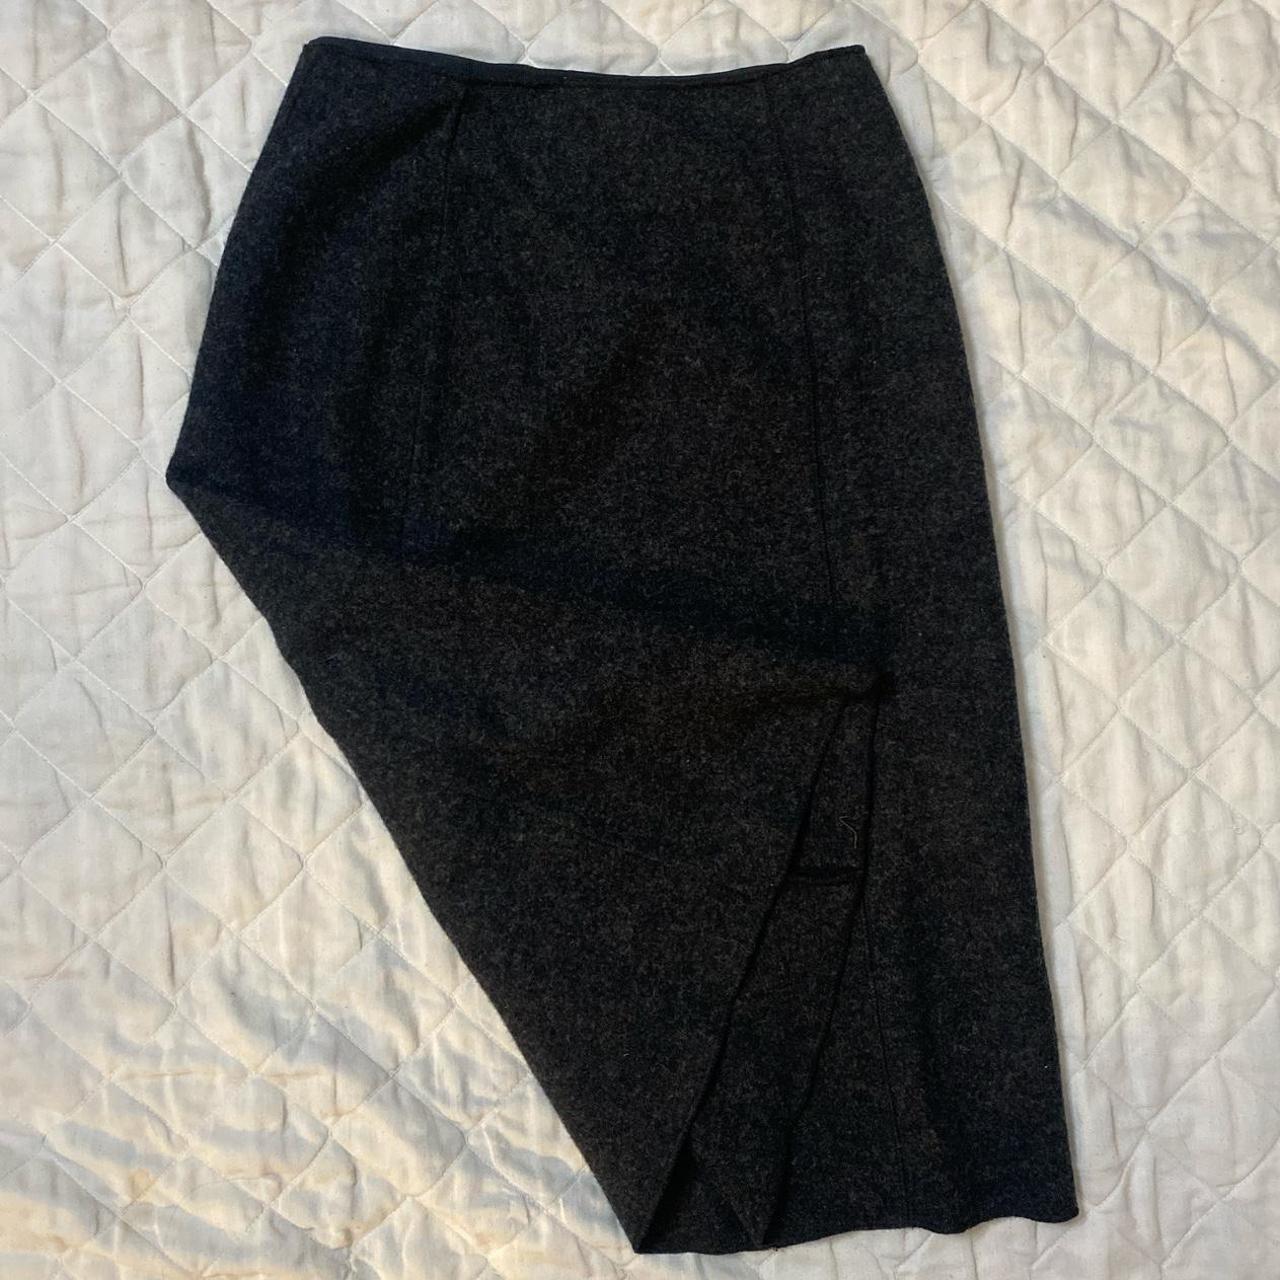 Country Road Women's Grey and Black Skirt (4)